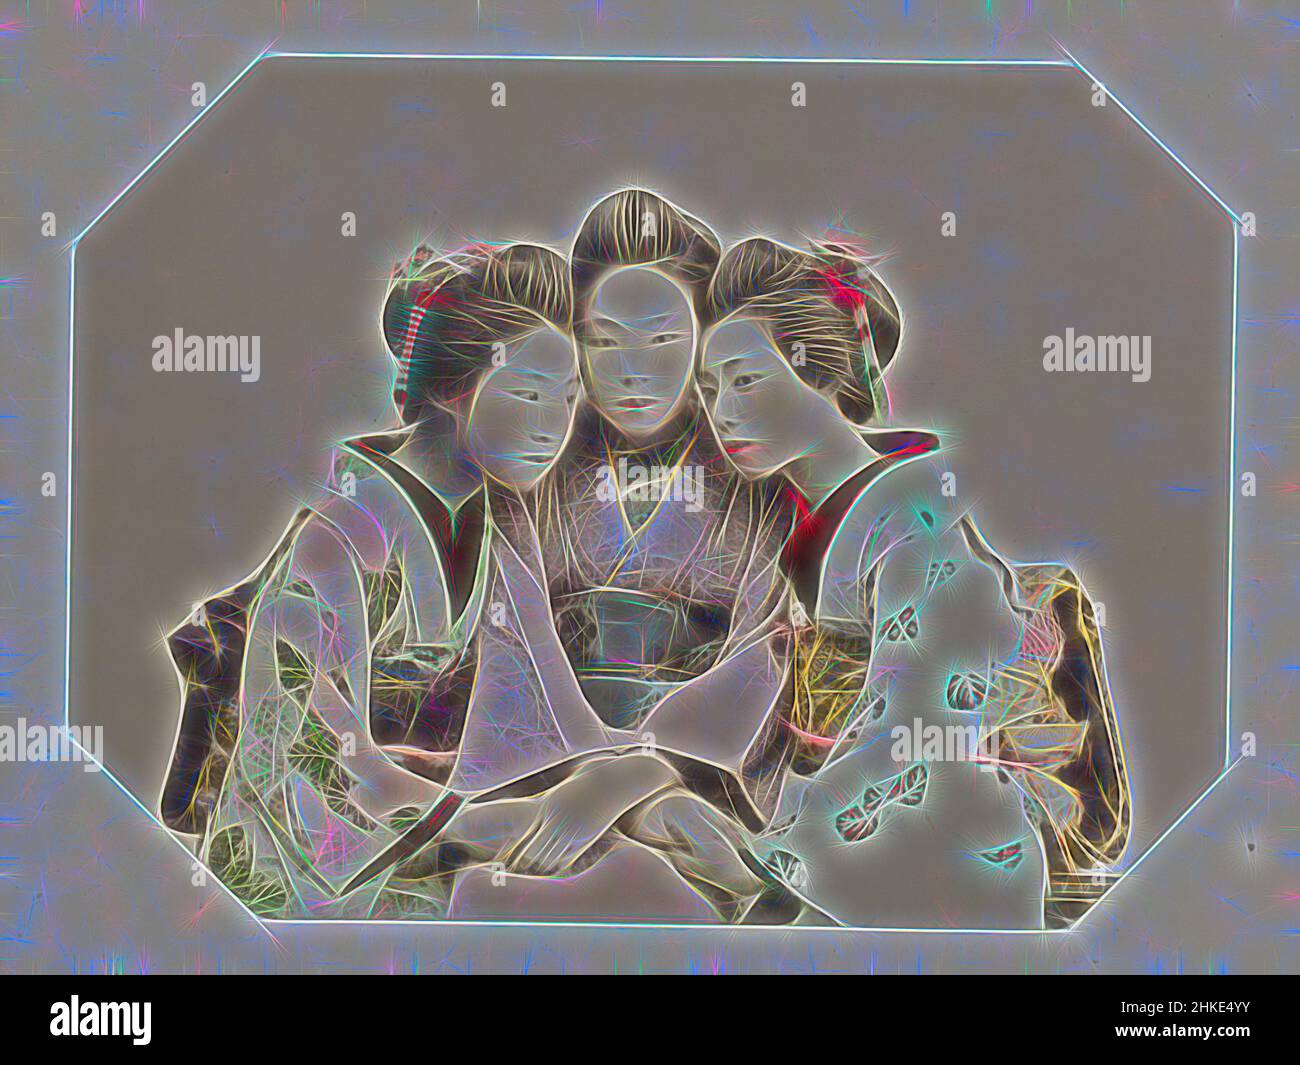 Inspired by Group portrait of three Japanese girls, Singing Girls, Part of Photo album of recordings of sights in Japan and studio portraits., Japan, c. 1870 - c. 1900, paint (coating), albumen print, height 199 mm × width 265 mm, Reimagined by Artotop. Classic art reinvented with a modern twist. Design of warm cheerful glowing of brightness and light ray radiance. Photography inspired by surrealism and futurism, embracing dynamic energy of modern technology, movement, speed and revolutionize culture Stock Photo